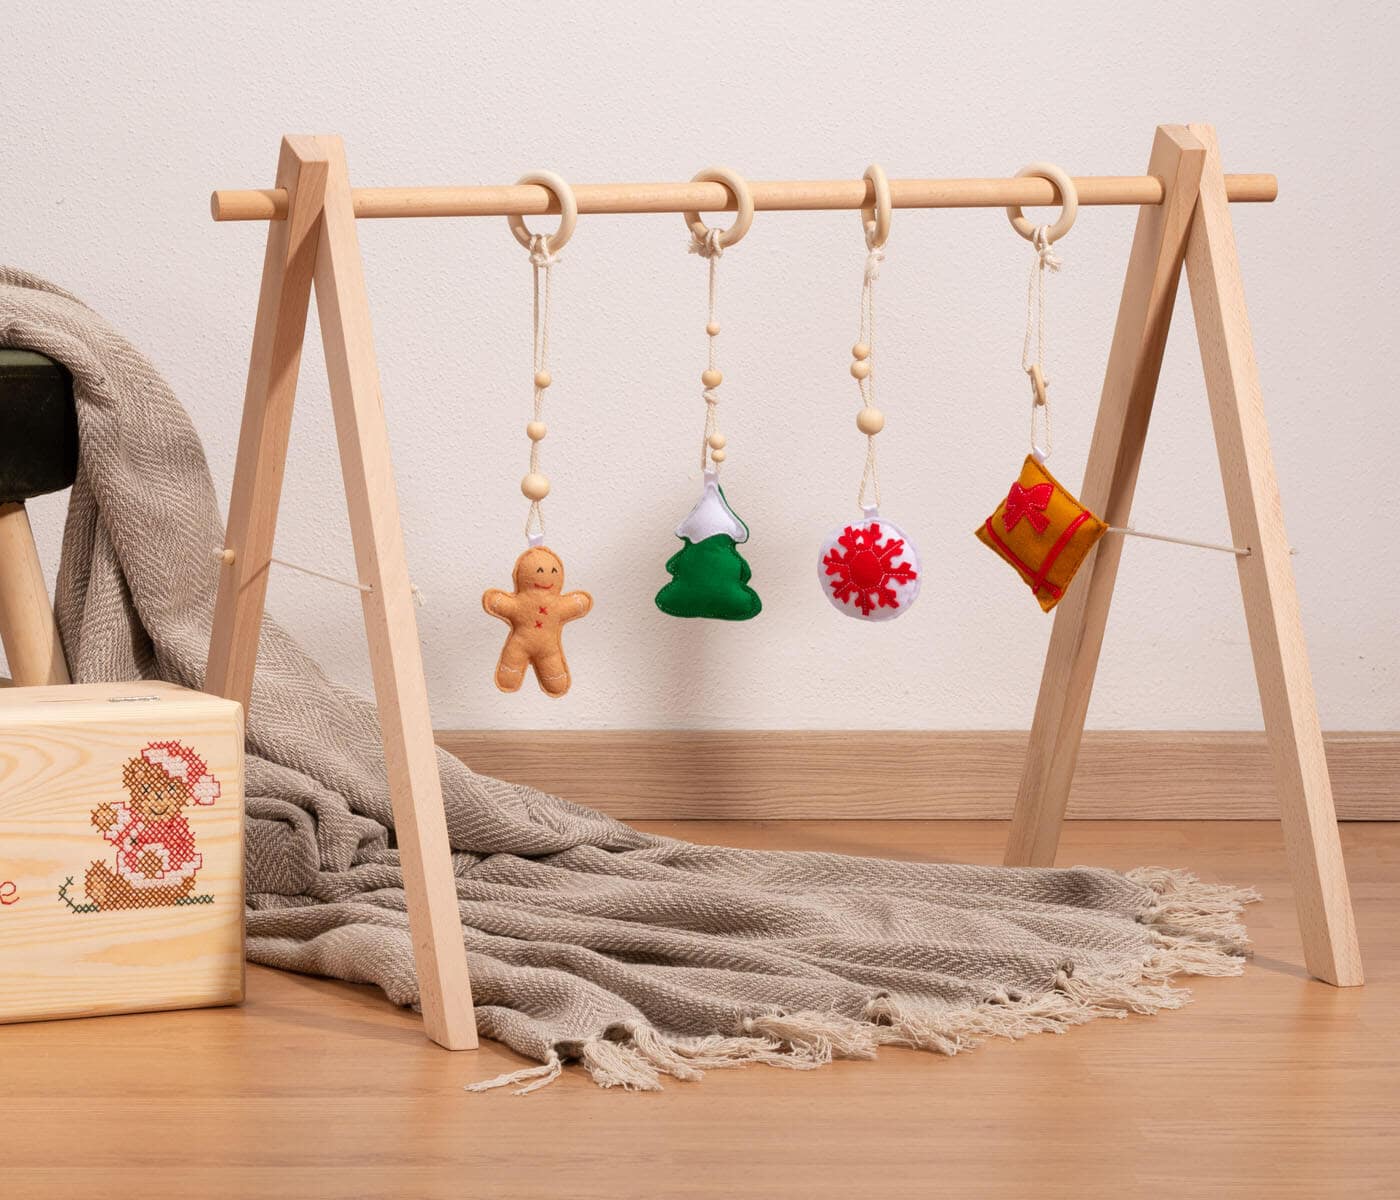 How to make your baby’s first Christmas unique!